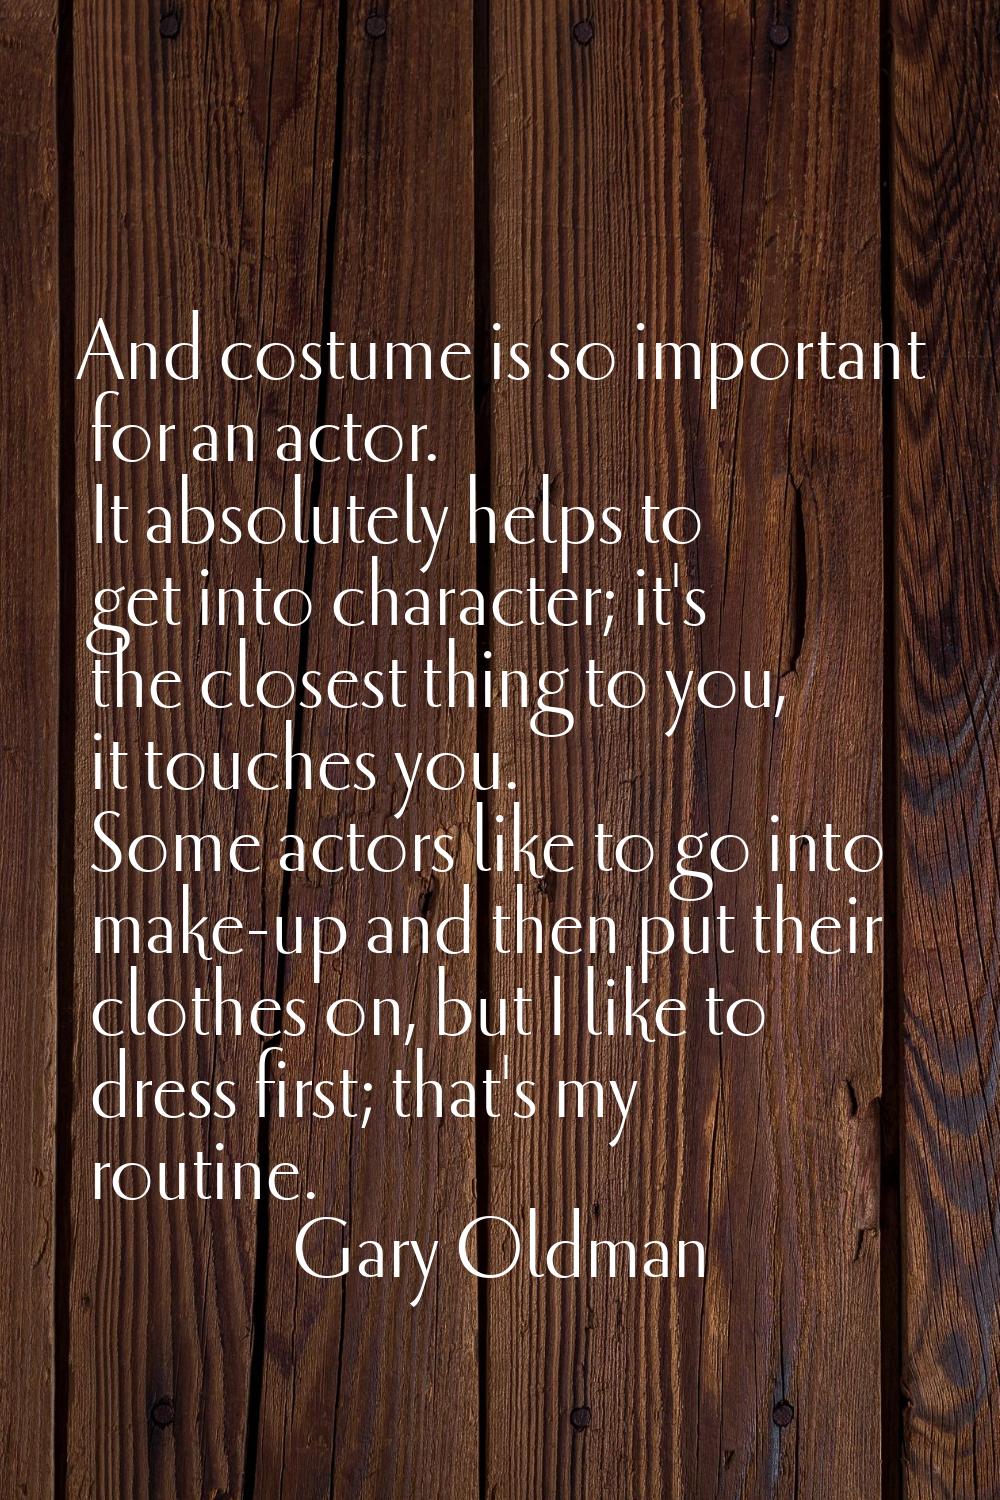 And costume is so important for an actor. It absolutely helps to get into character; it's the close